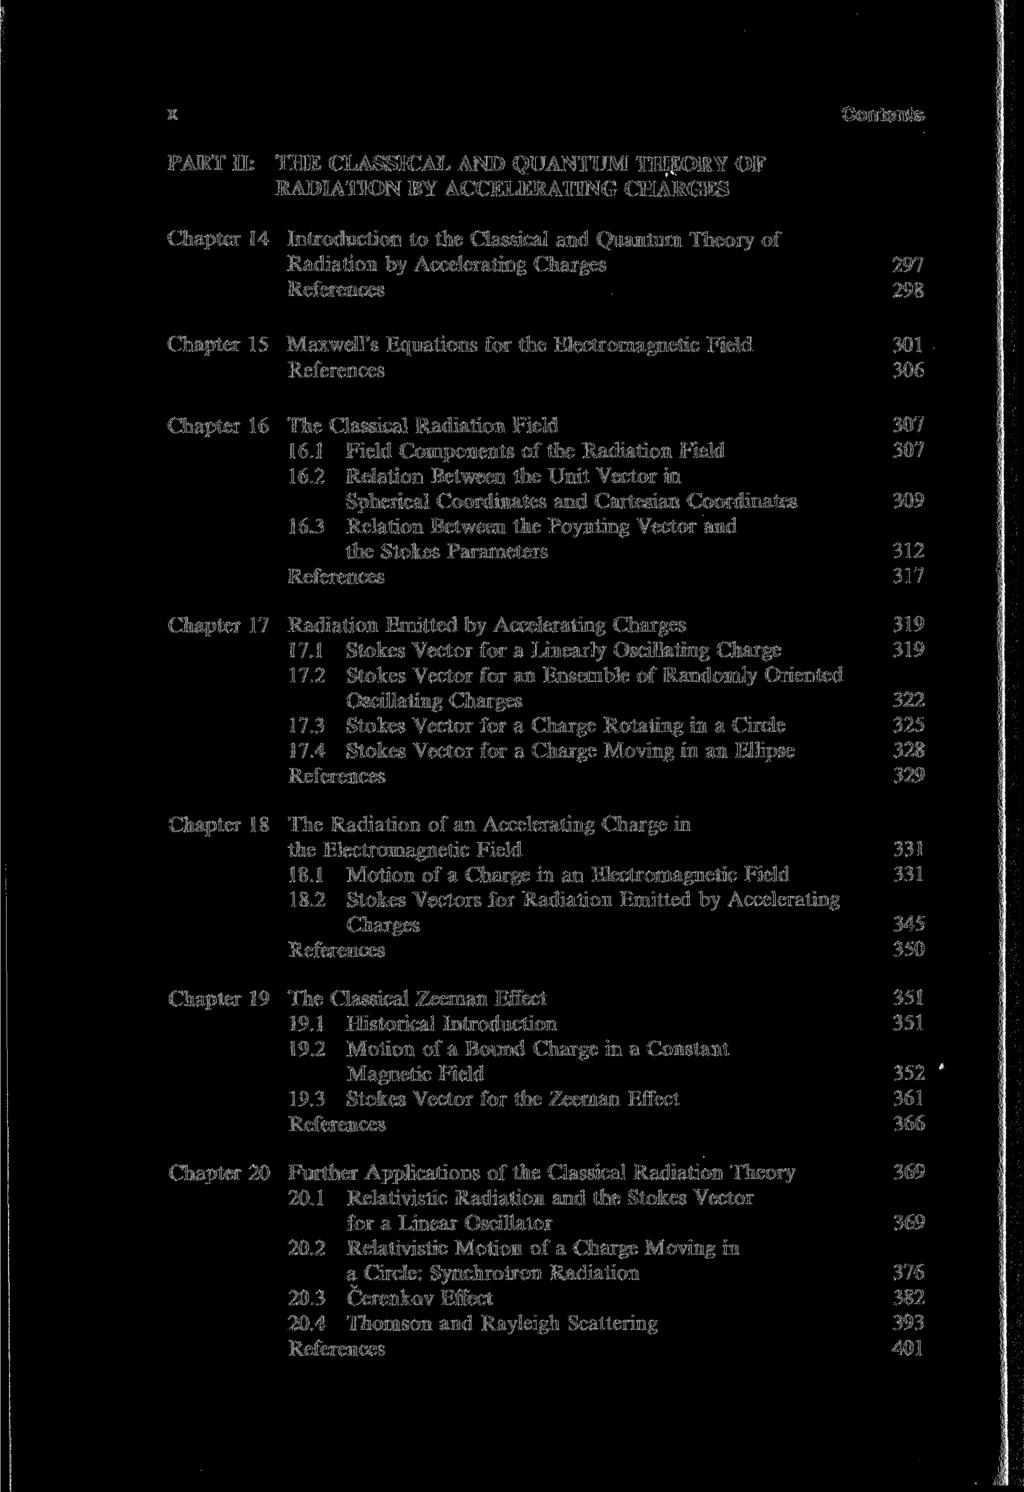 X Contents PART II: THE CLASSICAL AND QUANTUM THEORY OF RADIATION BY ACCELERATING CHARGES Chapter 14 Introduction to the Classical and Quantum Theory of Radiation by Accelerating Charges 297